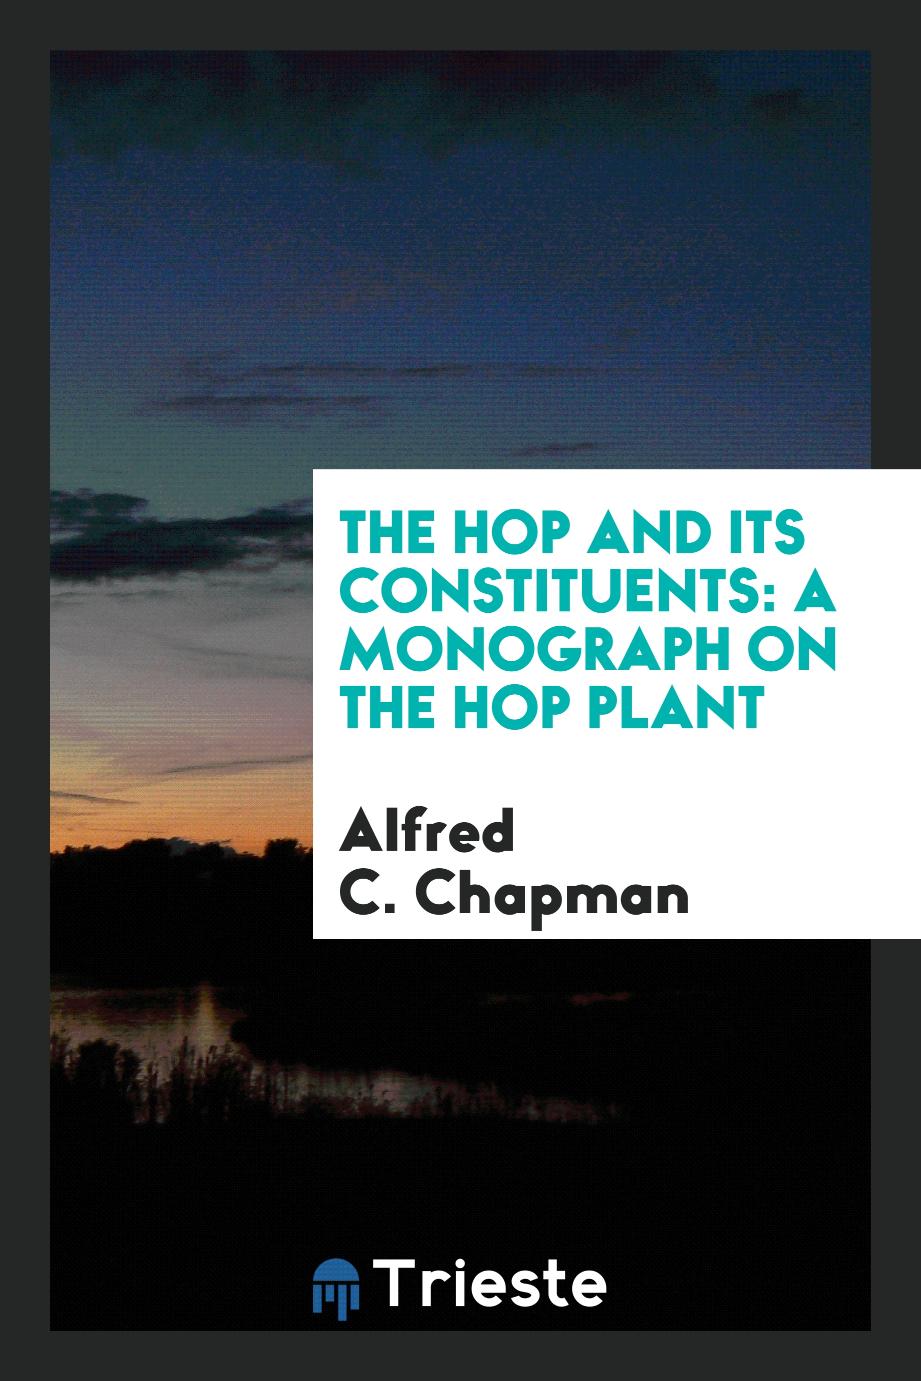 The Hop and Its Constituents: A Monograph on the Hop Plant